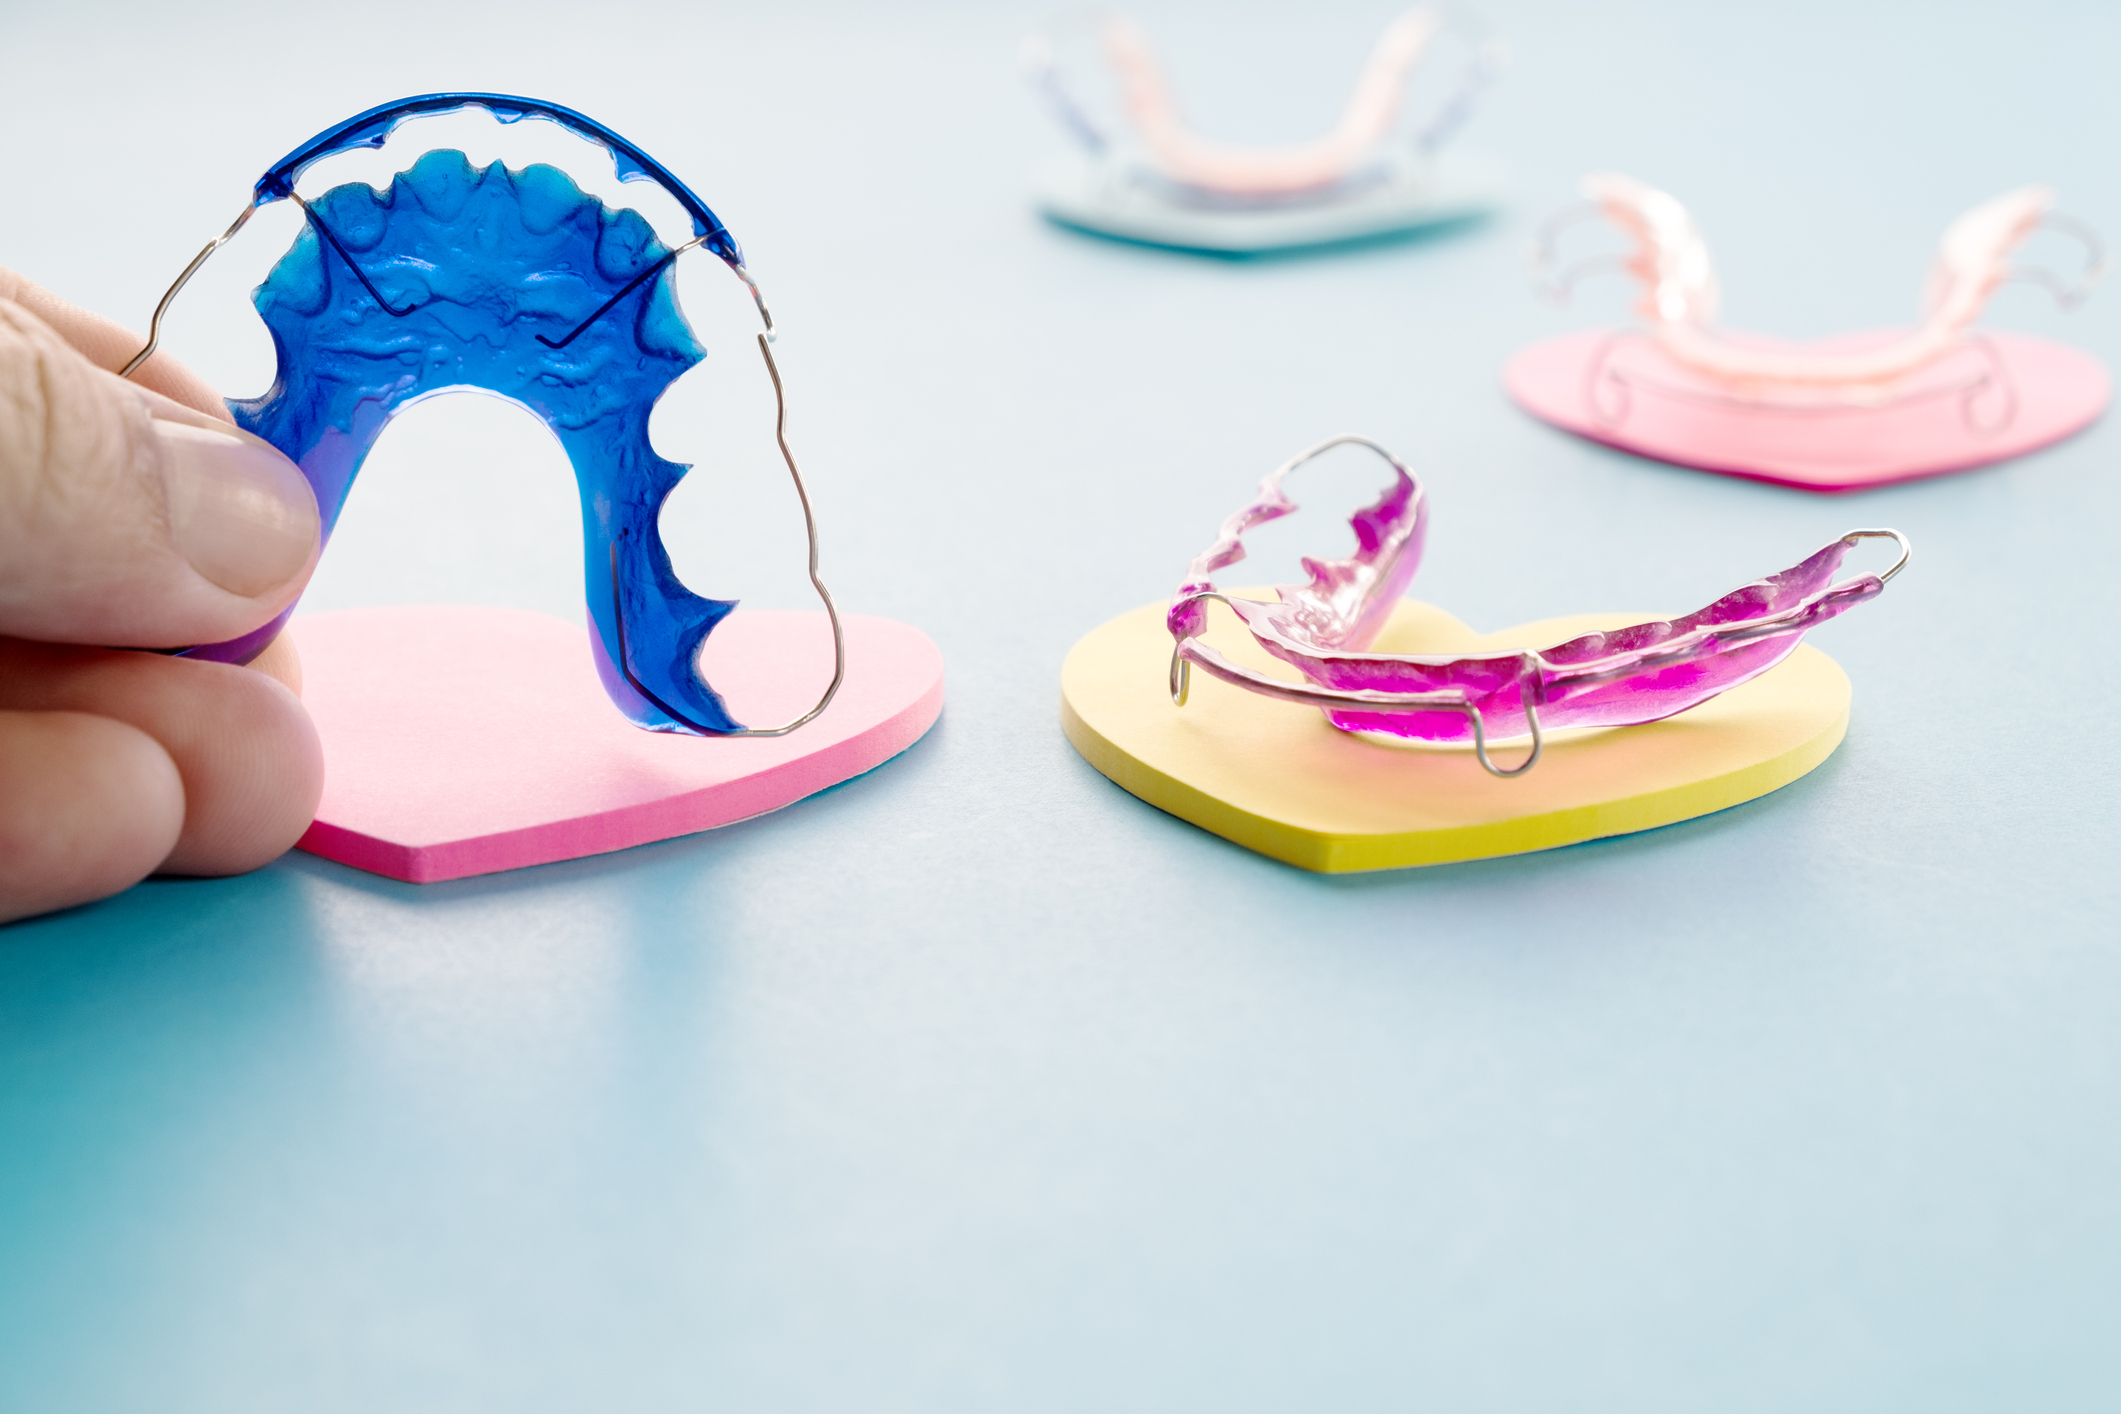 Retainers after Braces | Dr Murray Orthodontics